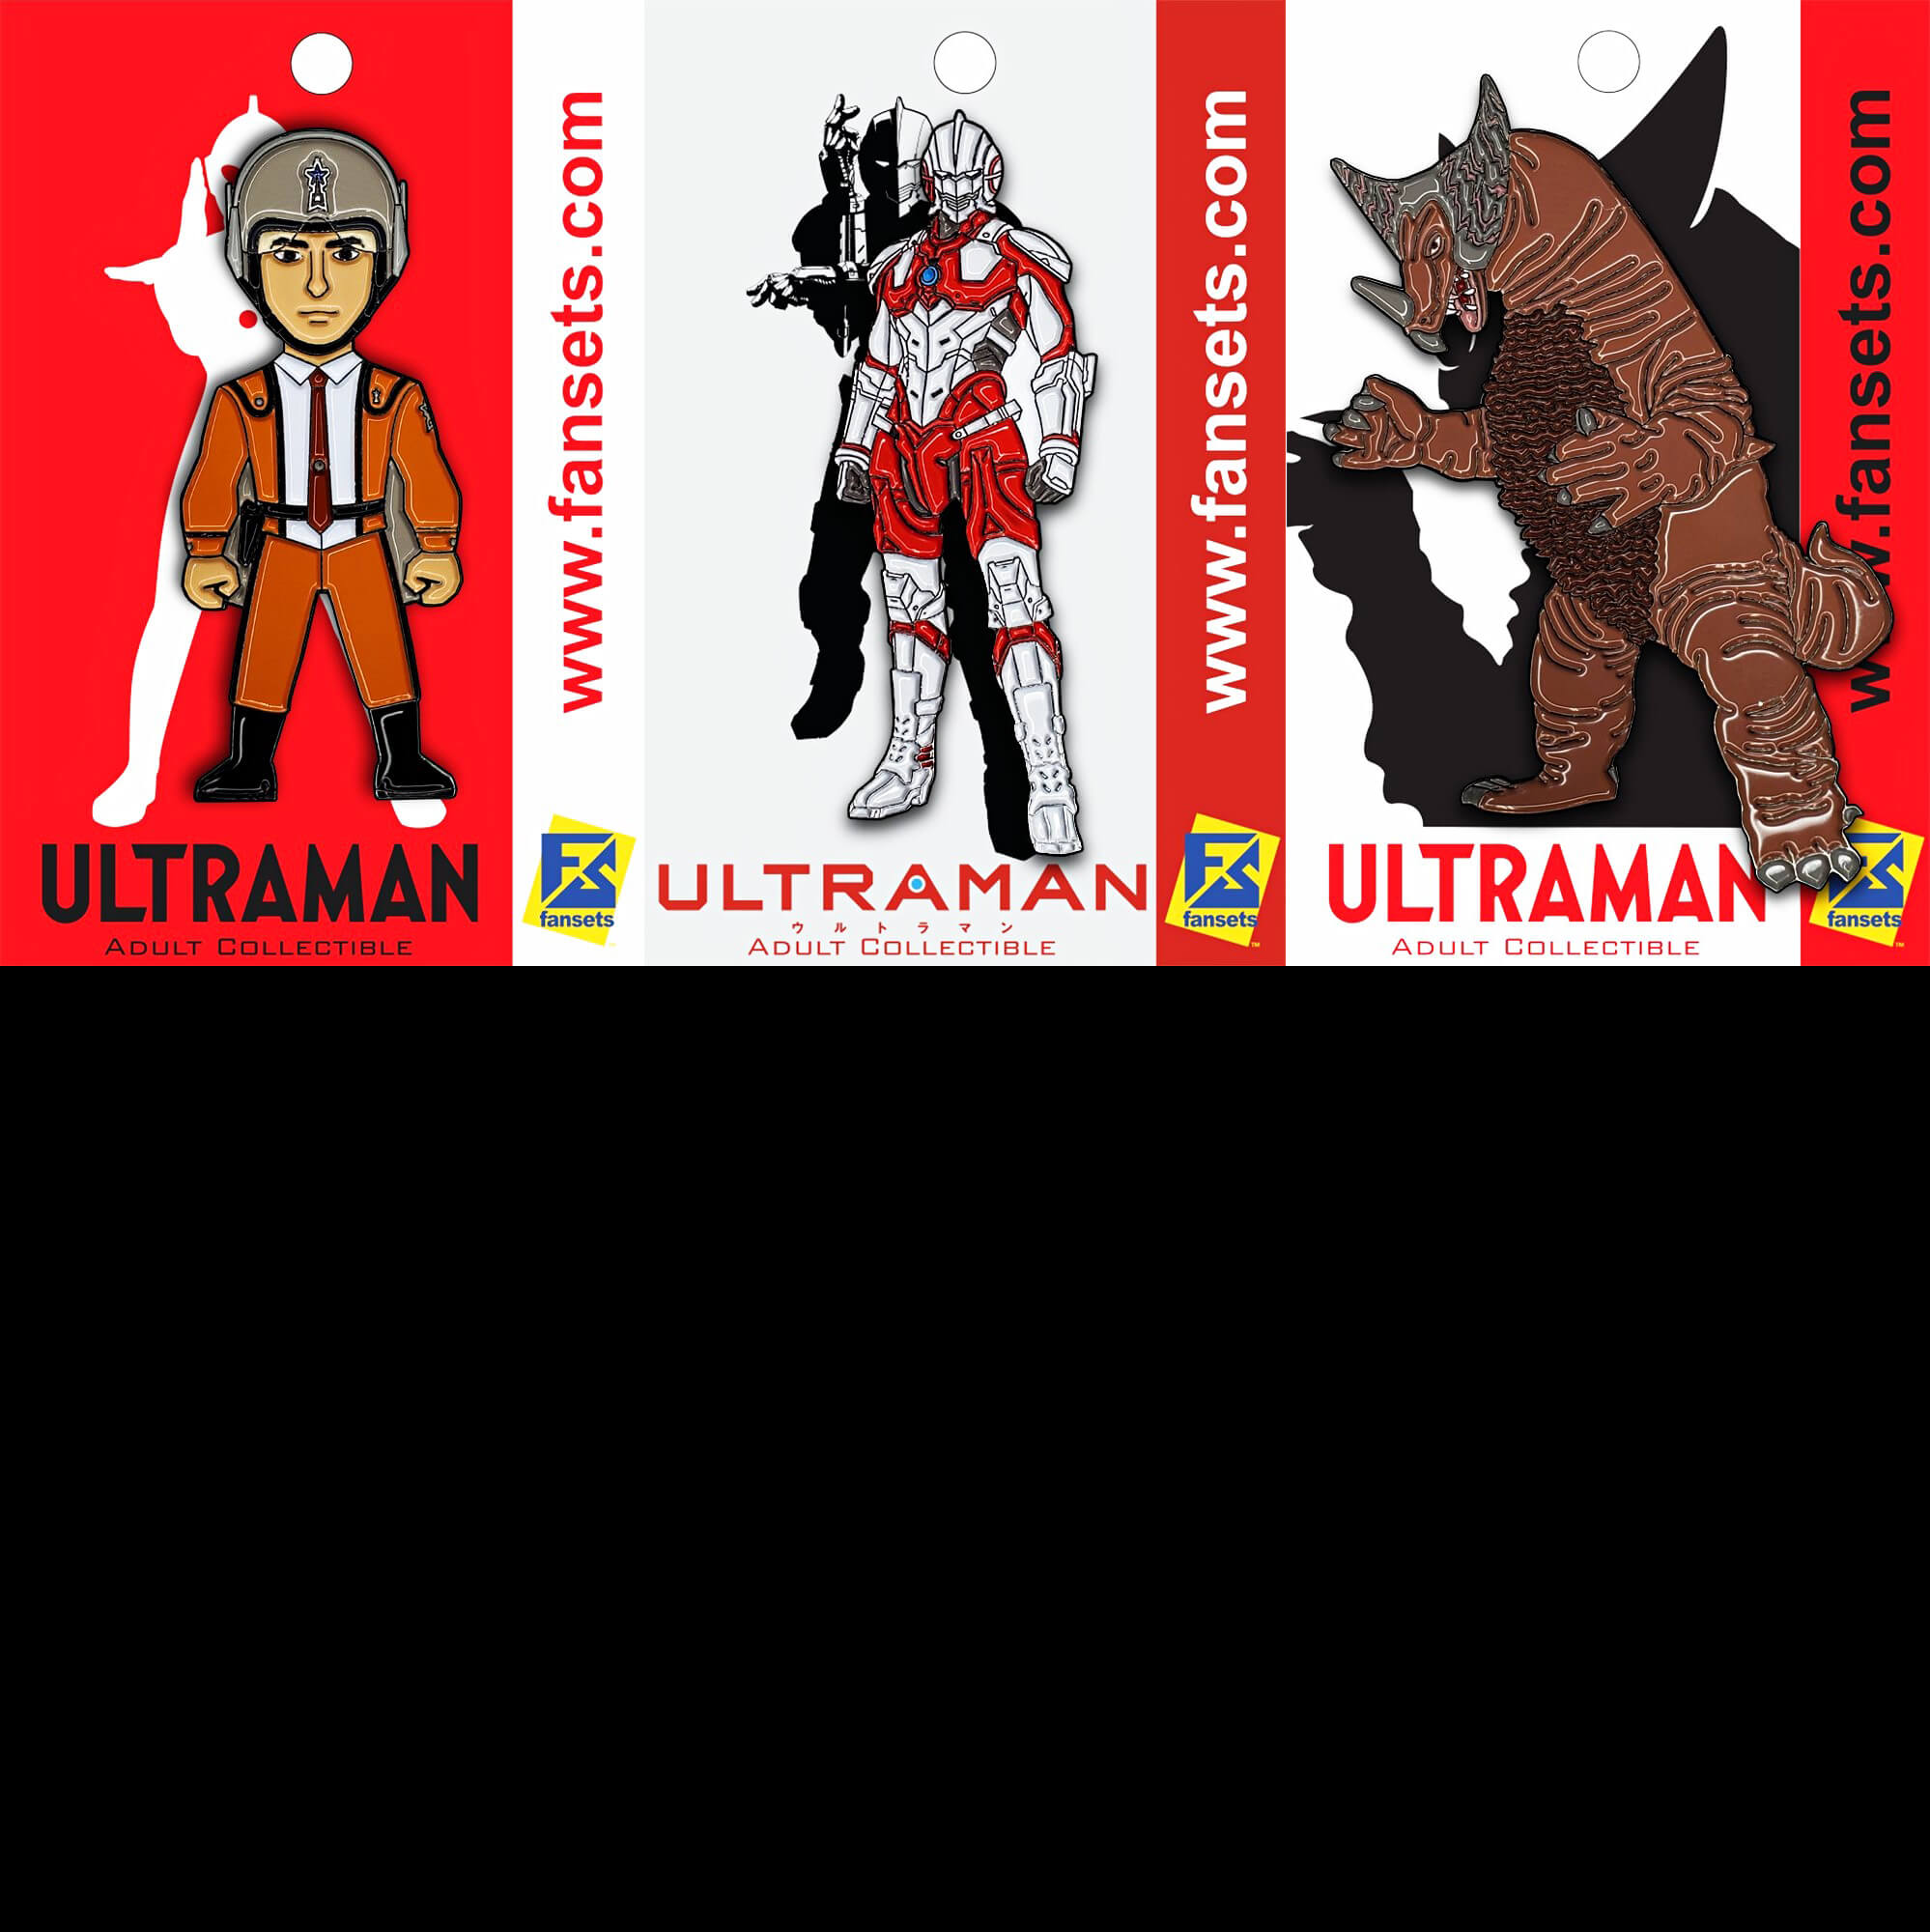 FANSETS BRINGS TOKUSATSU TO AMERICAN LAPELS WITH CLASSIC AND ANIME ULTRAMAN PINS